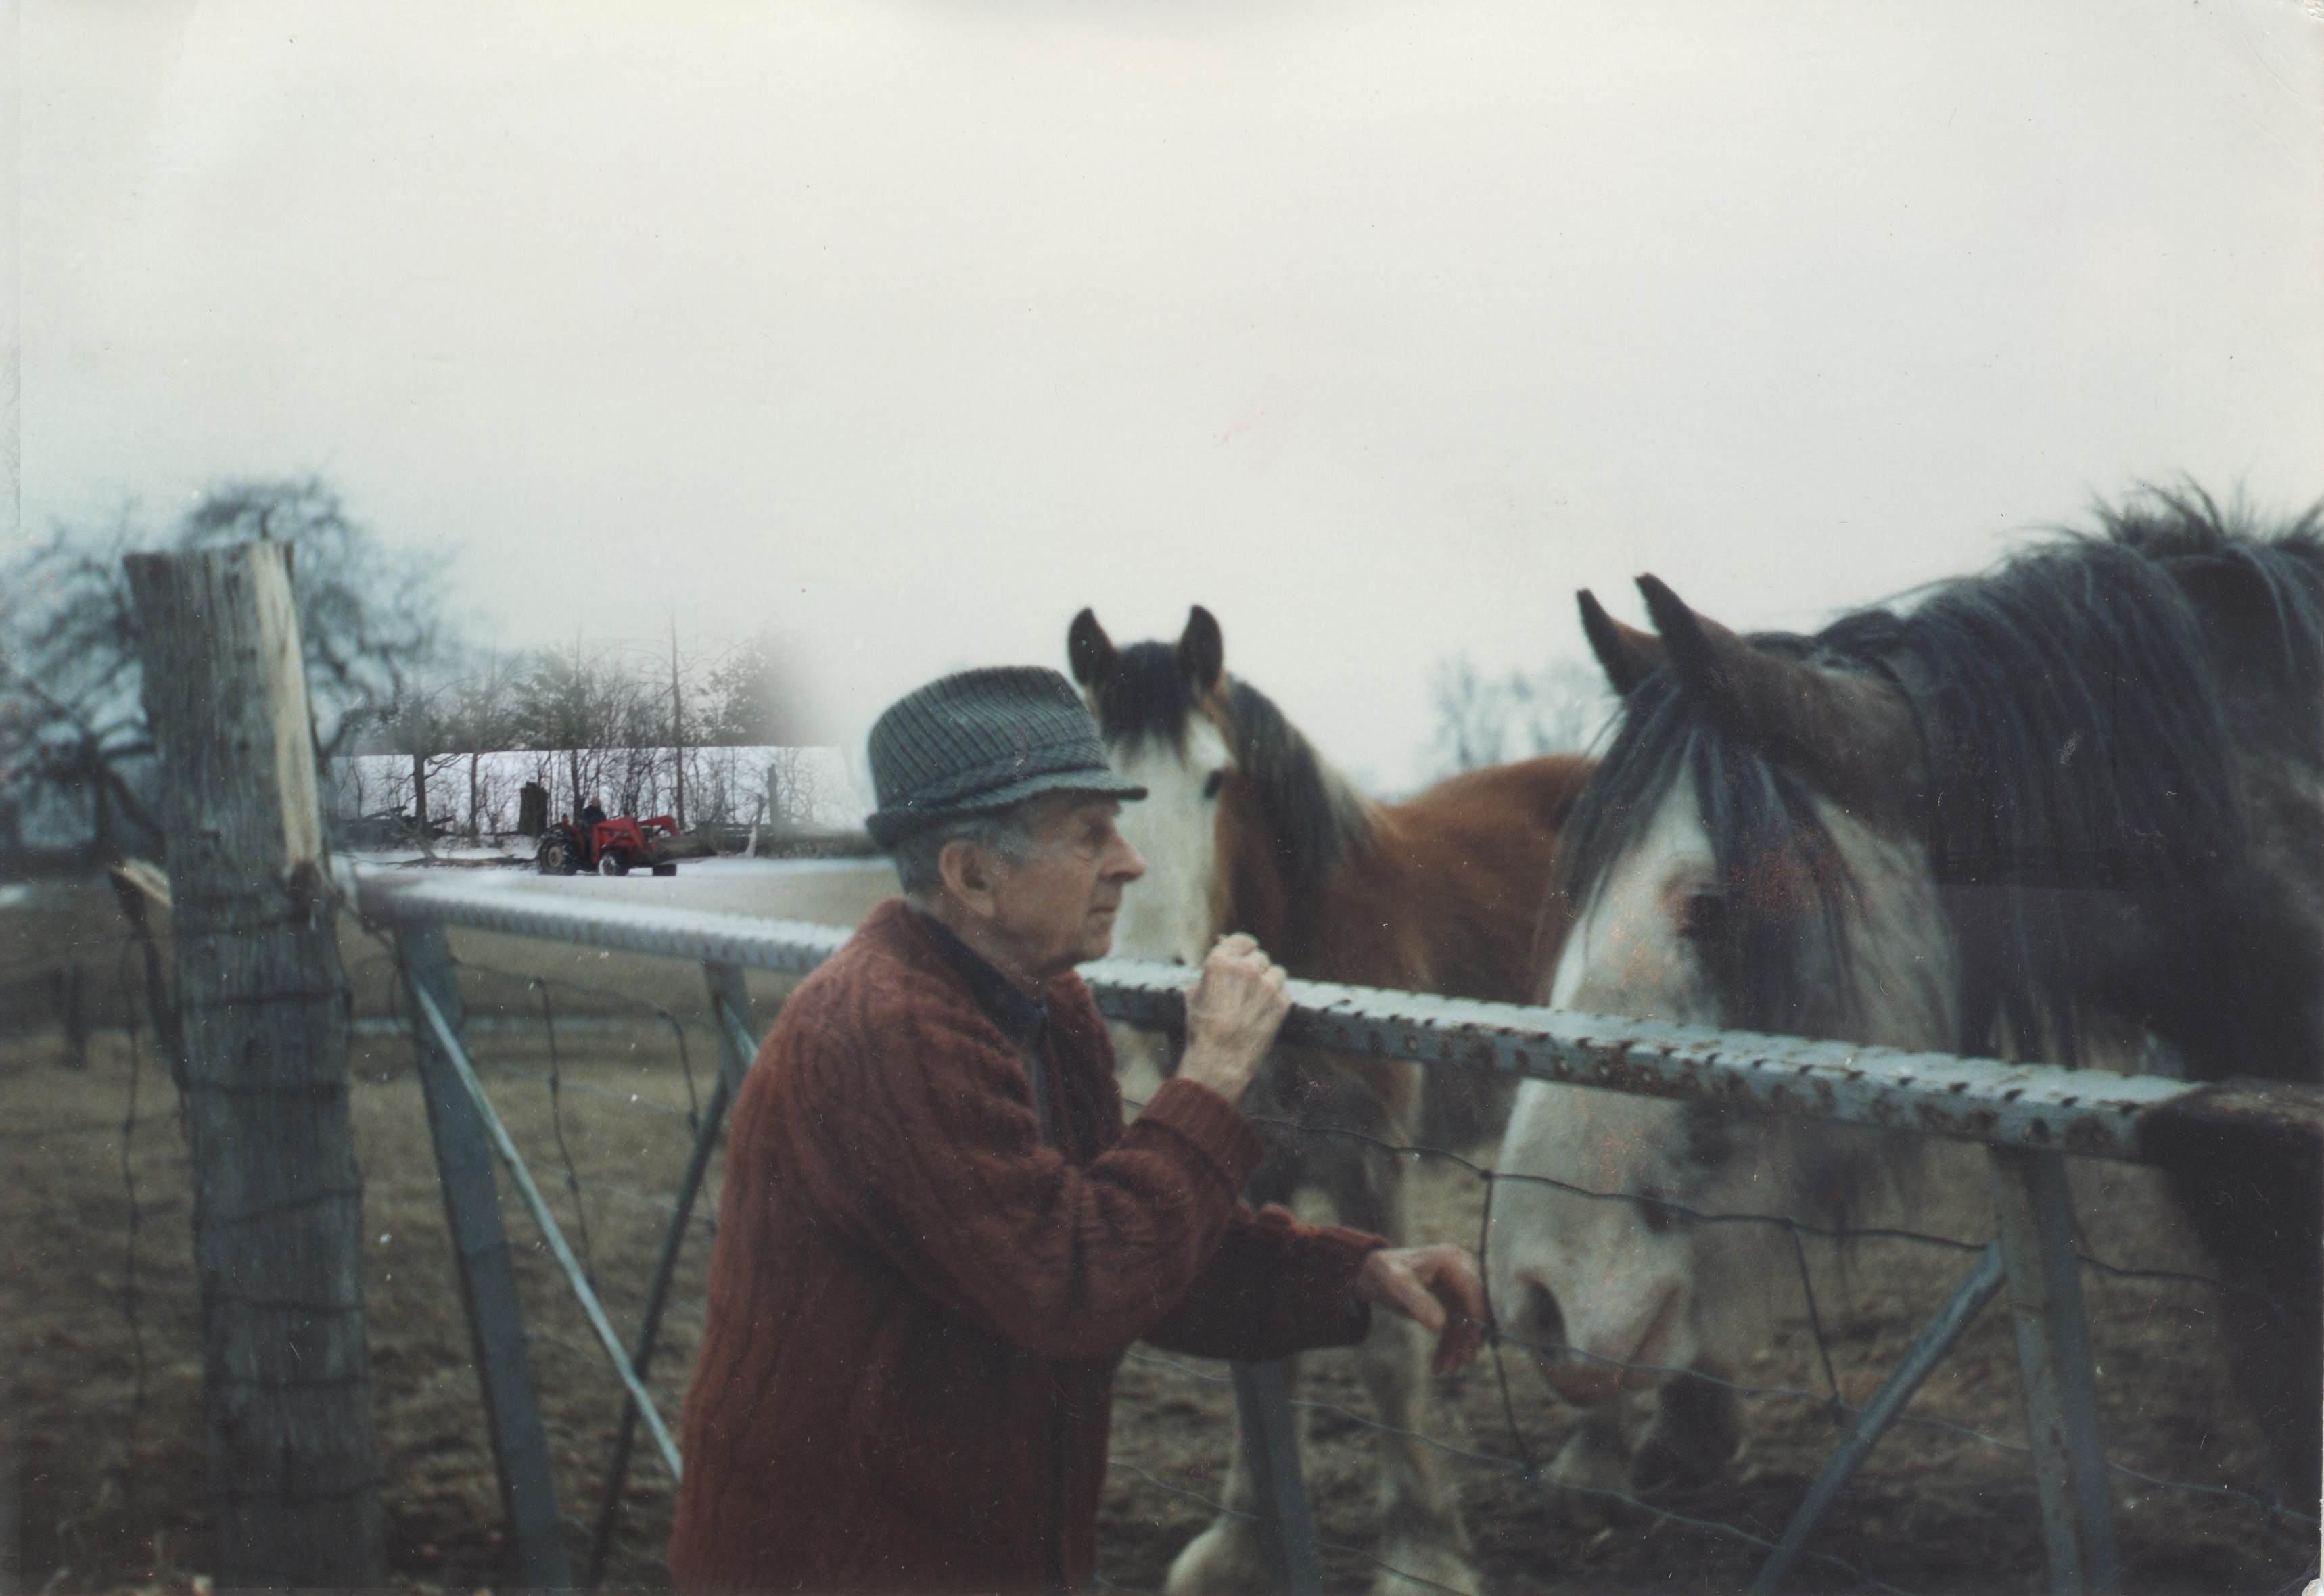 An elderly farmer standing at a steel gate, rubbing the nose of his of horse. In background a tractor skids firewood.